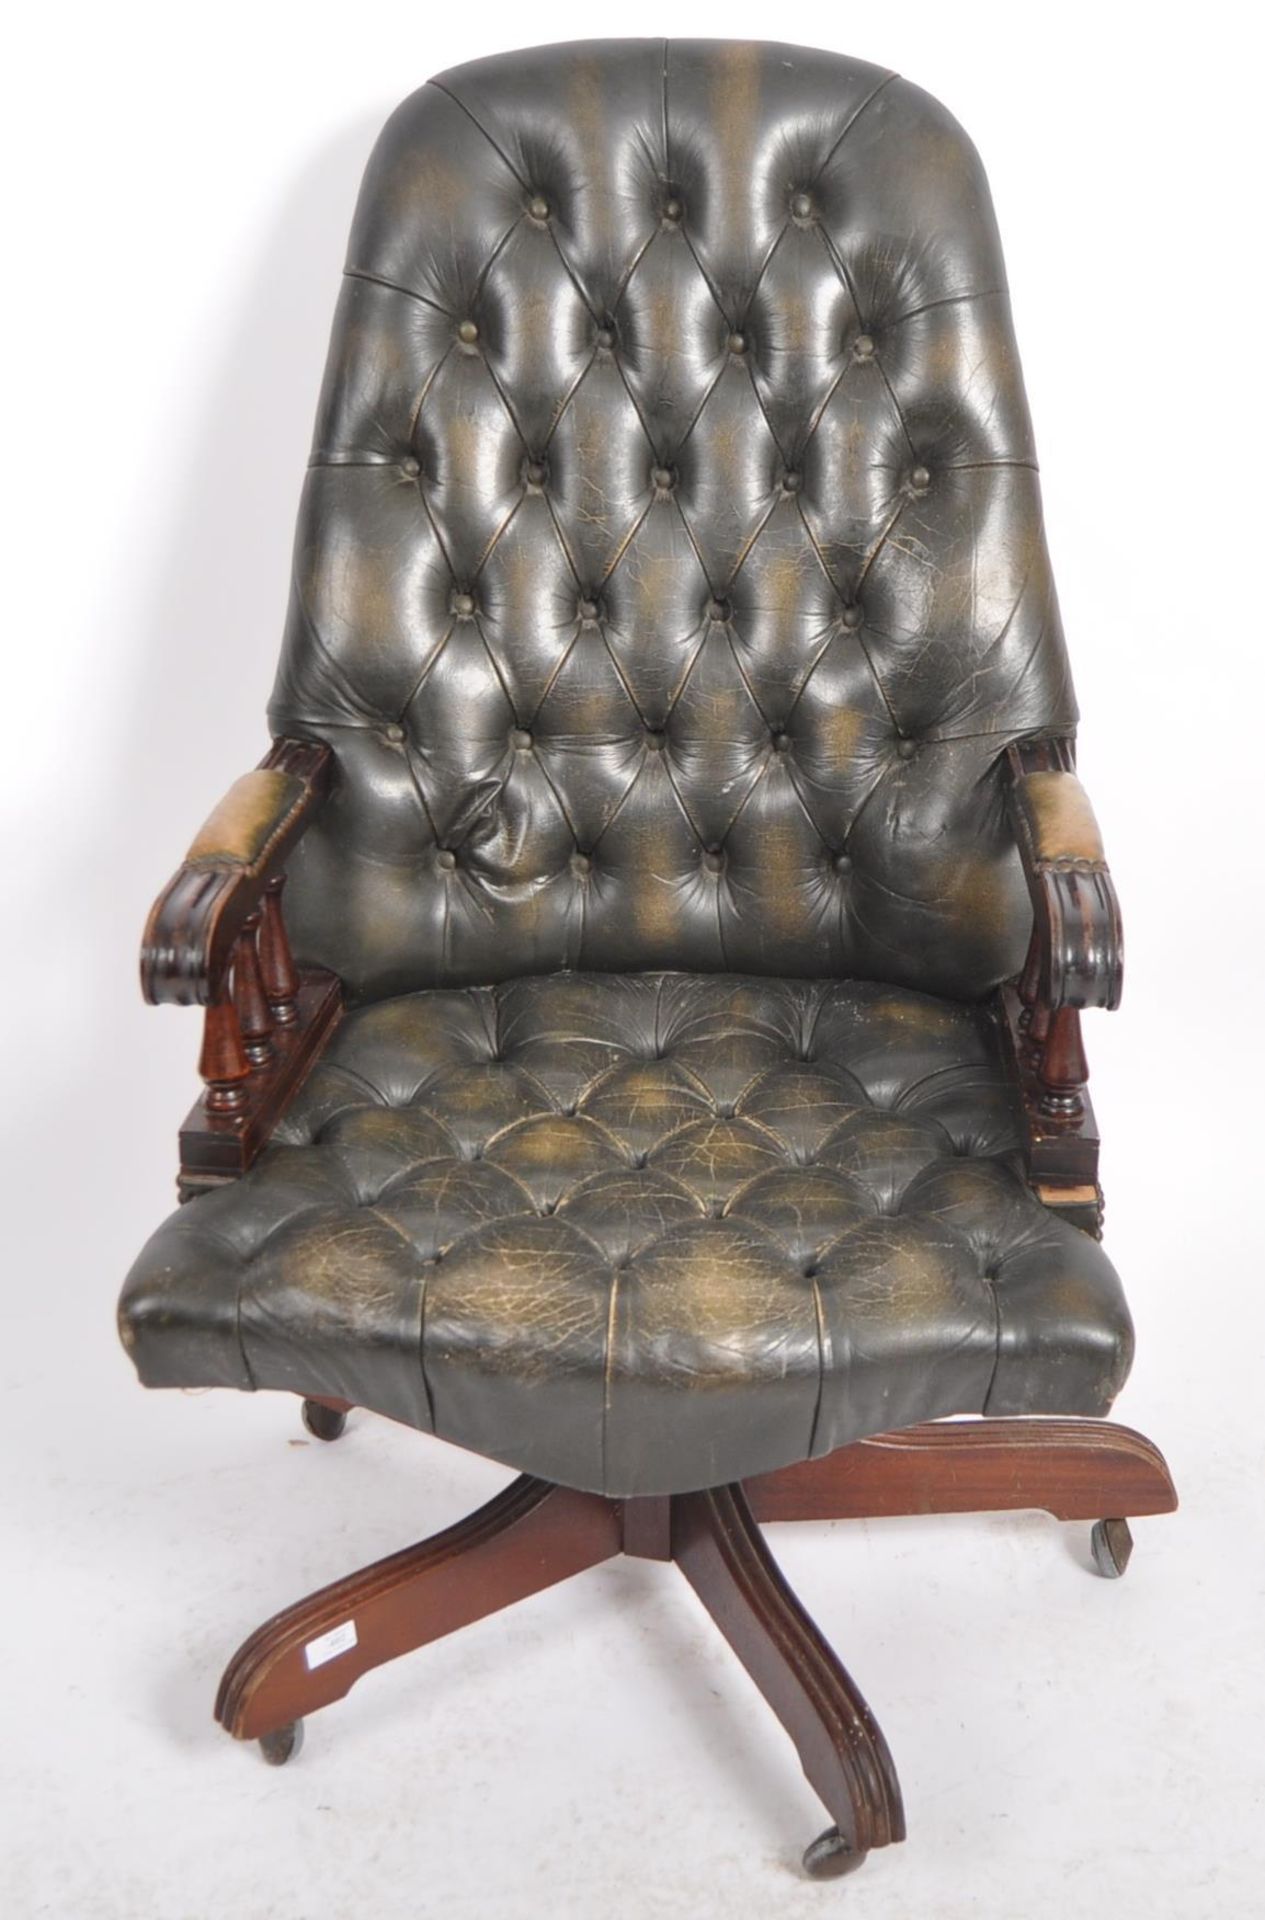 1980s VICTORIAN STYLE GREEN LEATHER CAPTAINS DESK CHAIR - Image 2 of 8